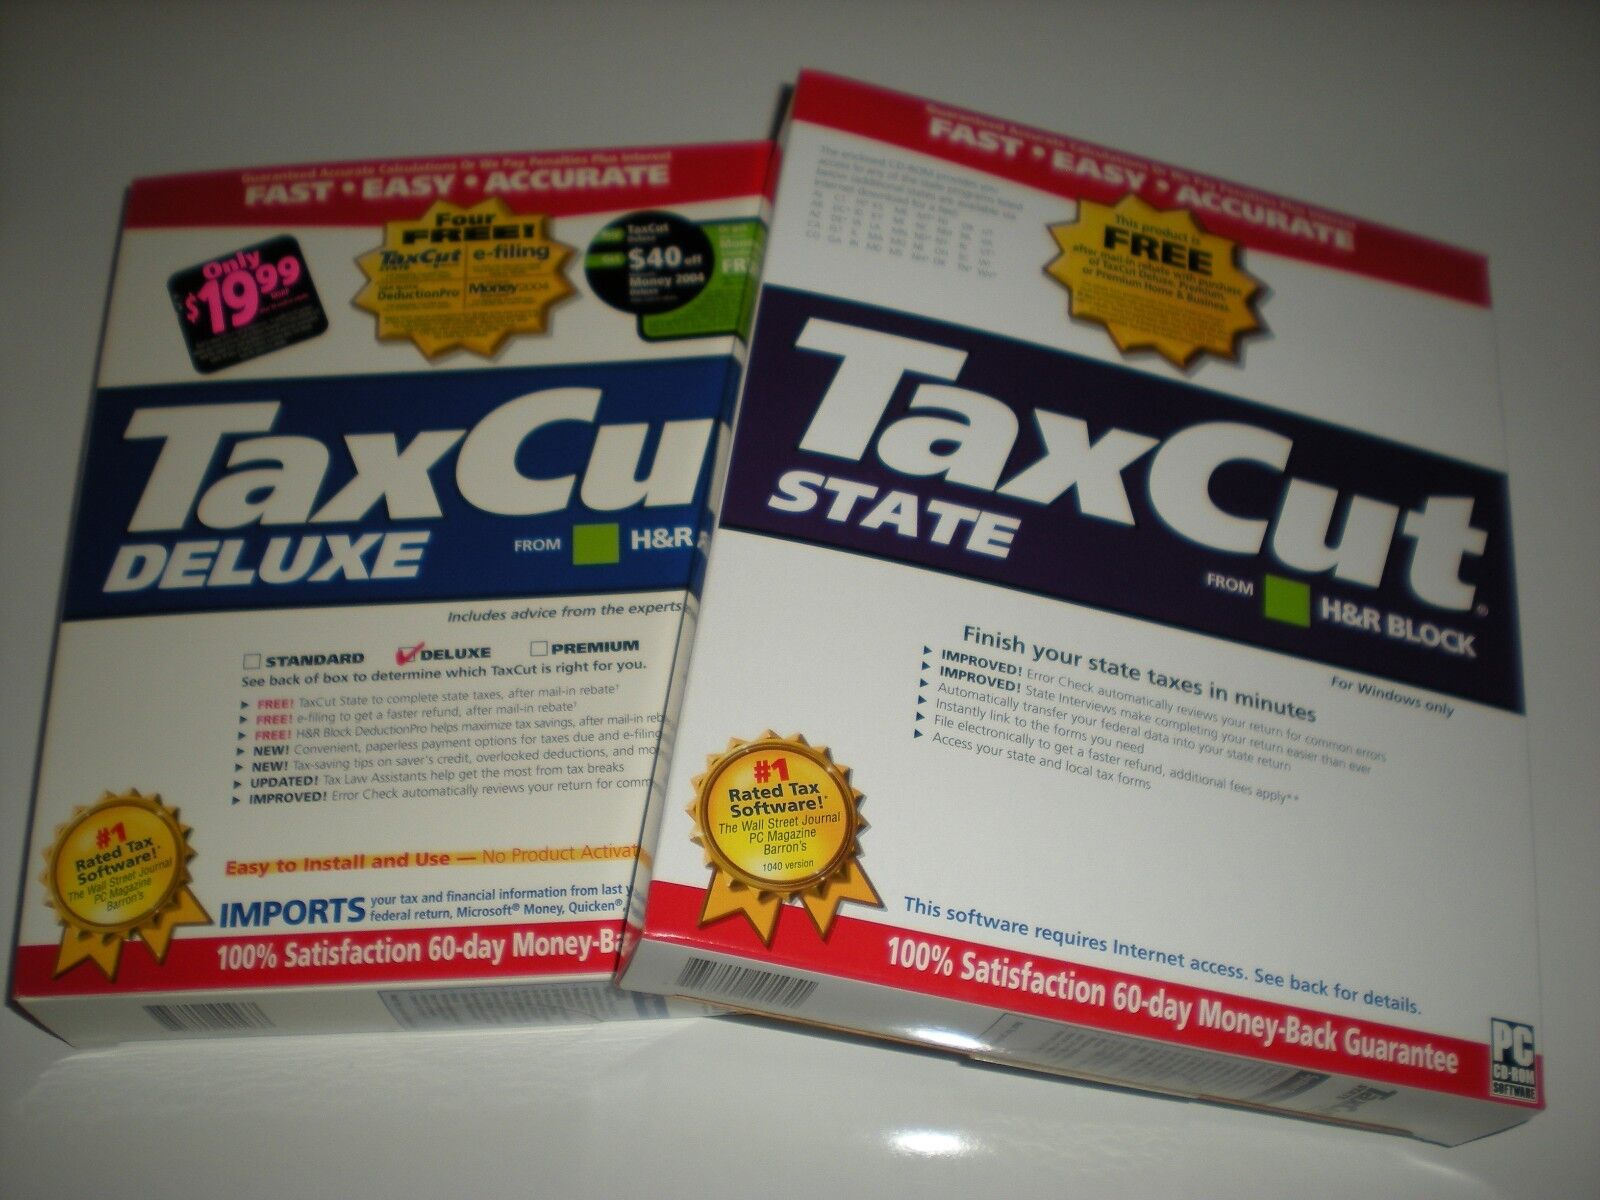 TaxCut 2003 Deluxe Tax Cut with State. New in boxes. 